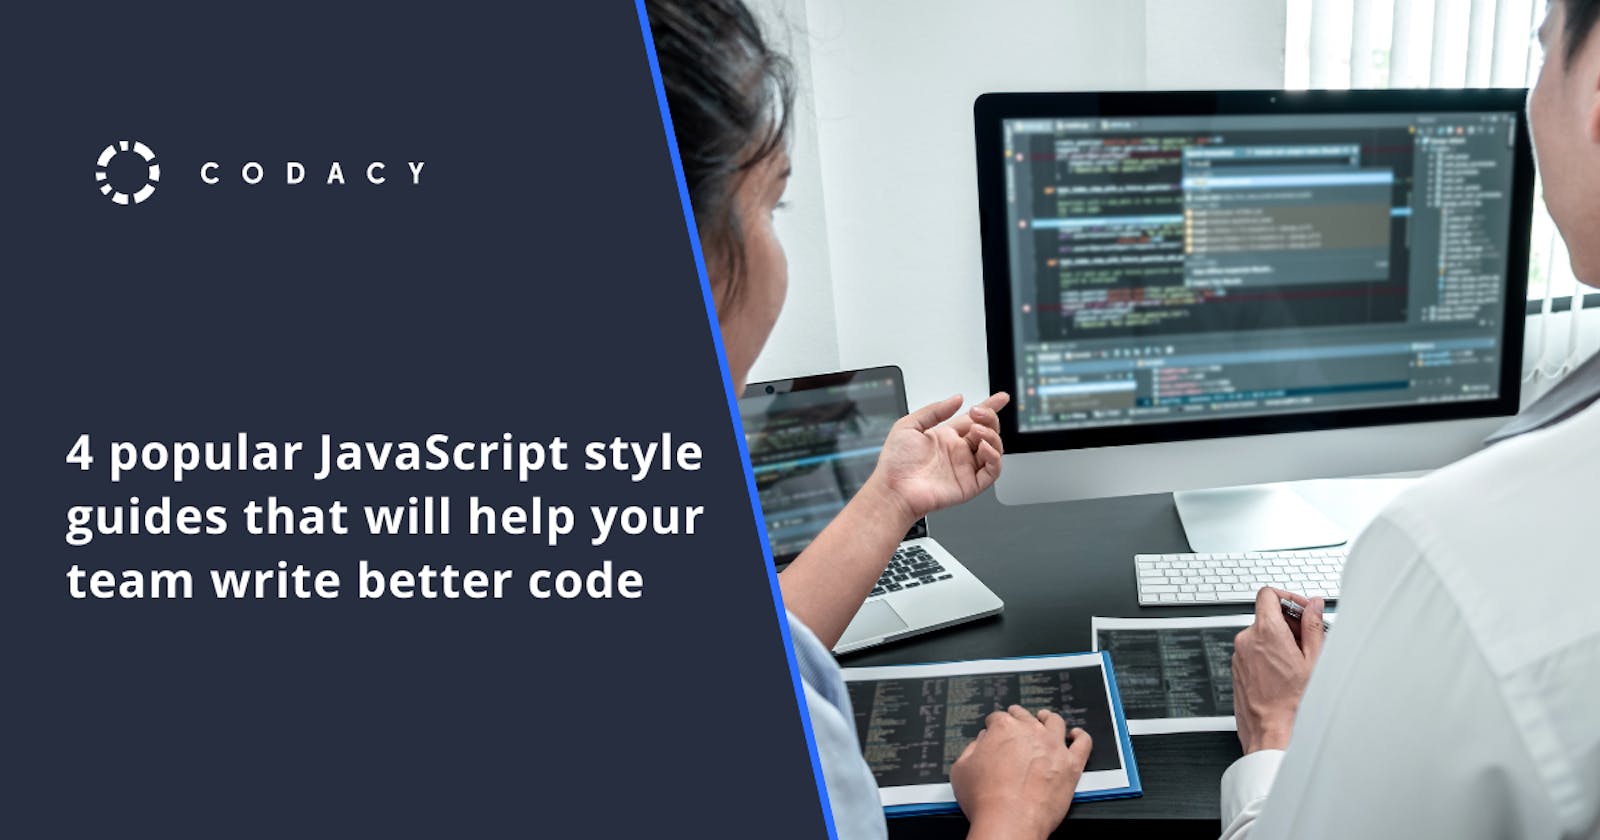 4 popular JavaScript style guides that will help your team write better code